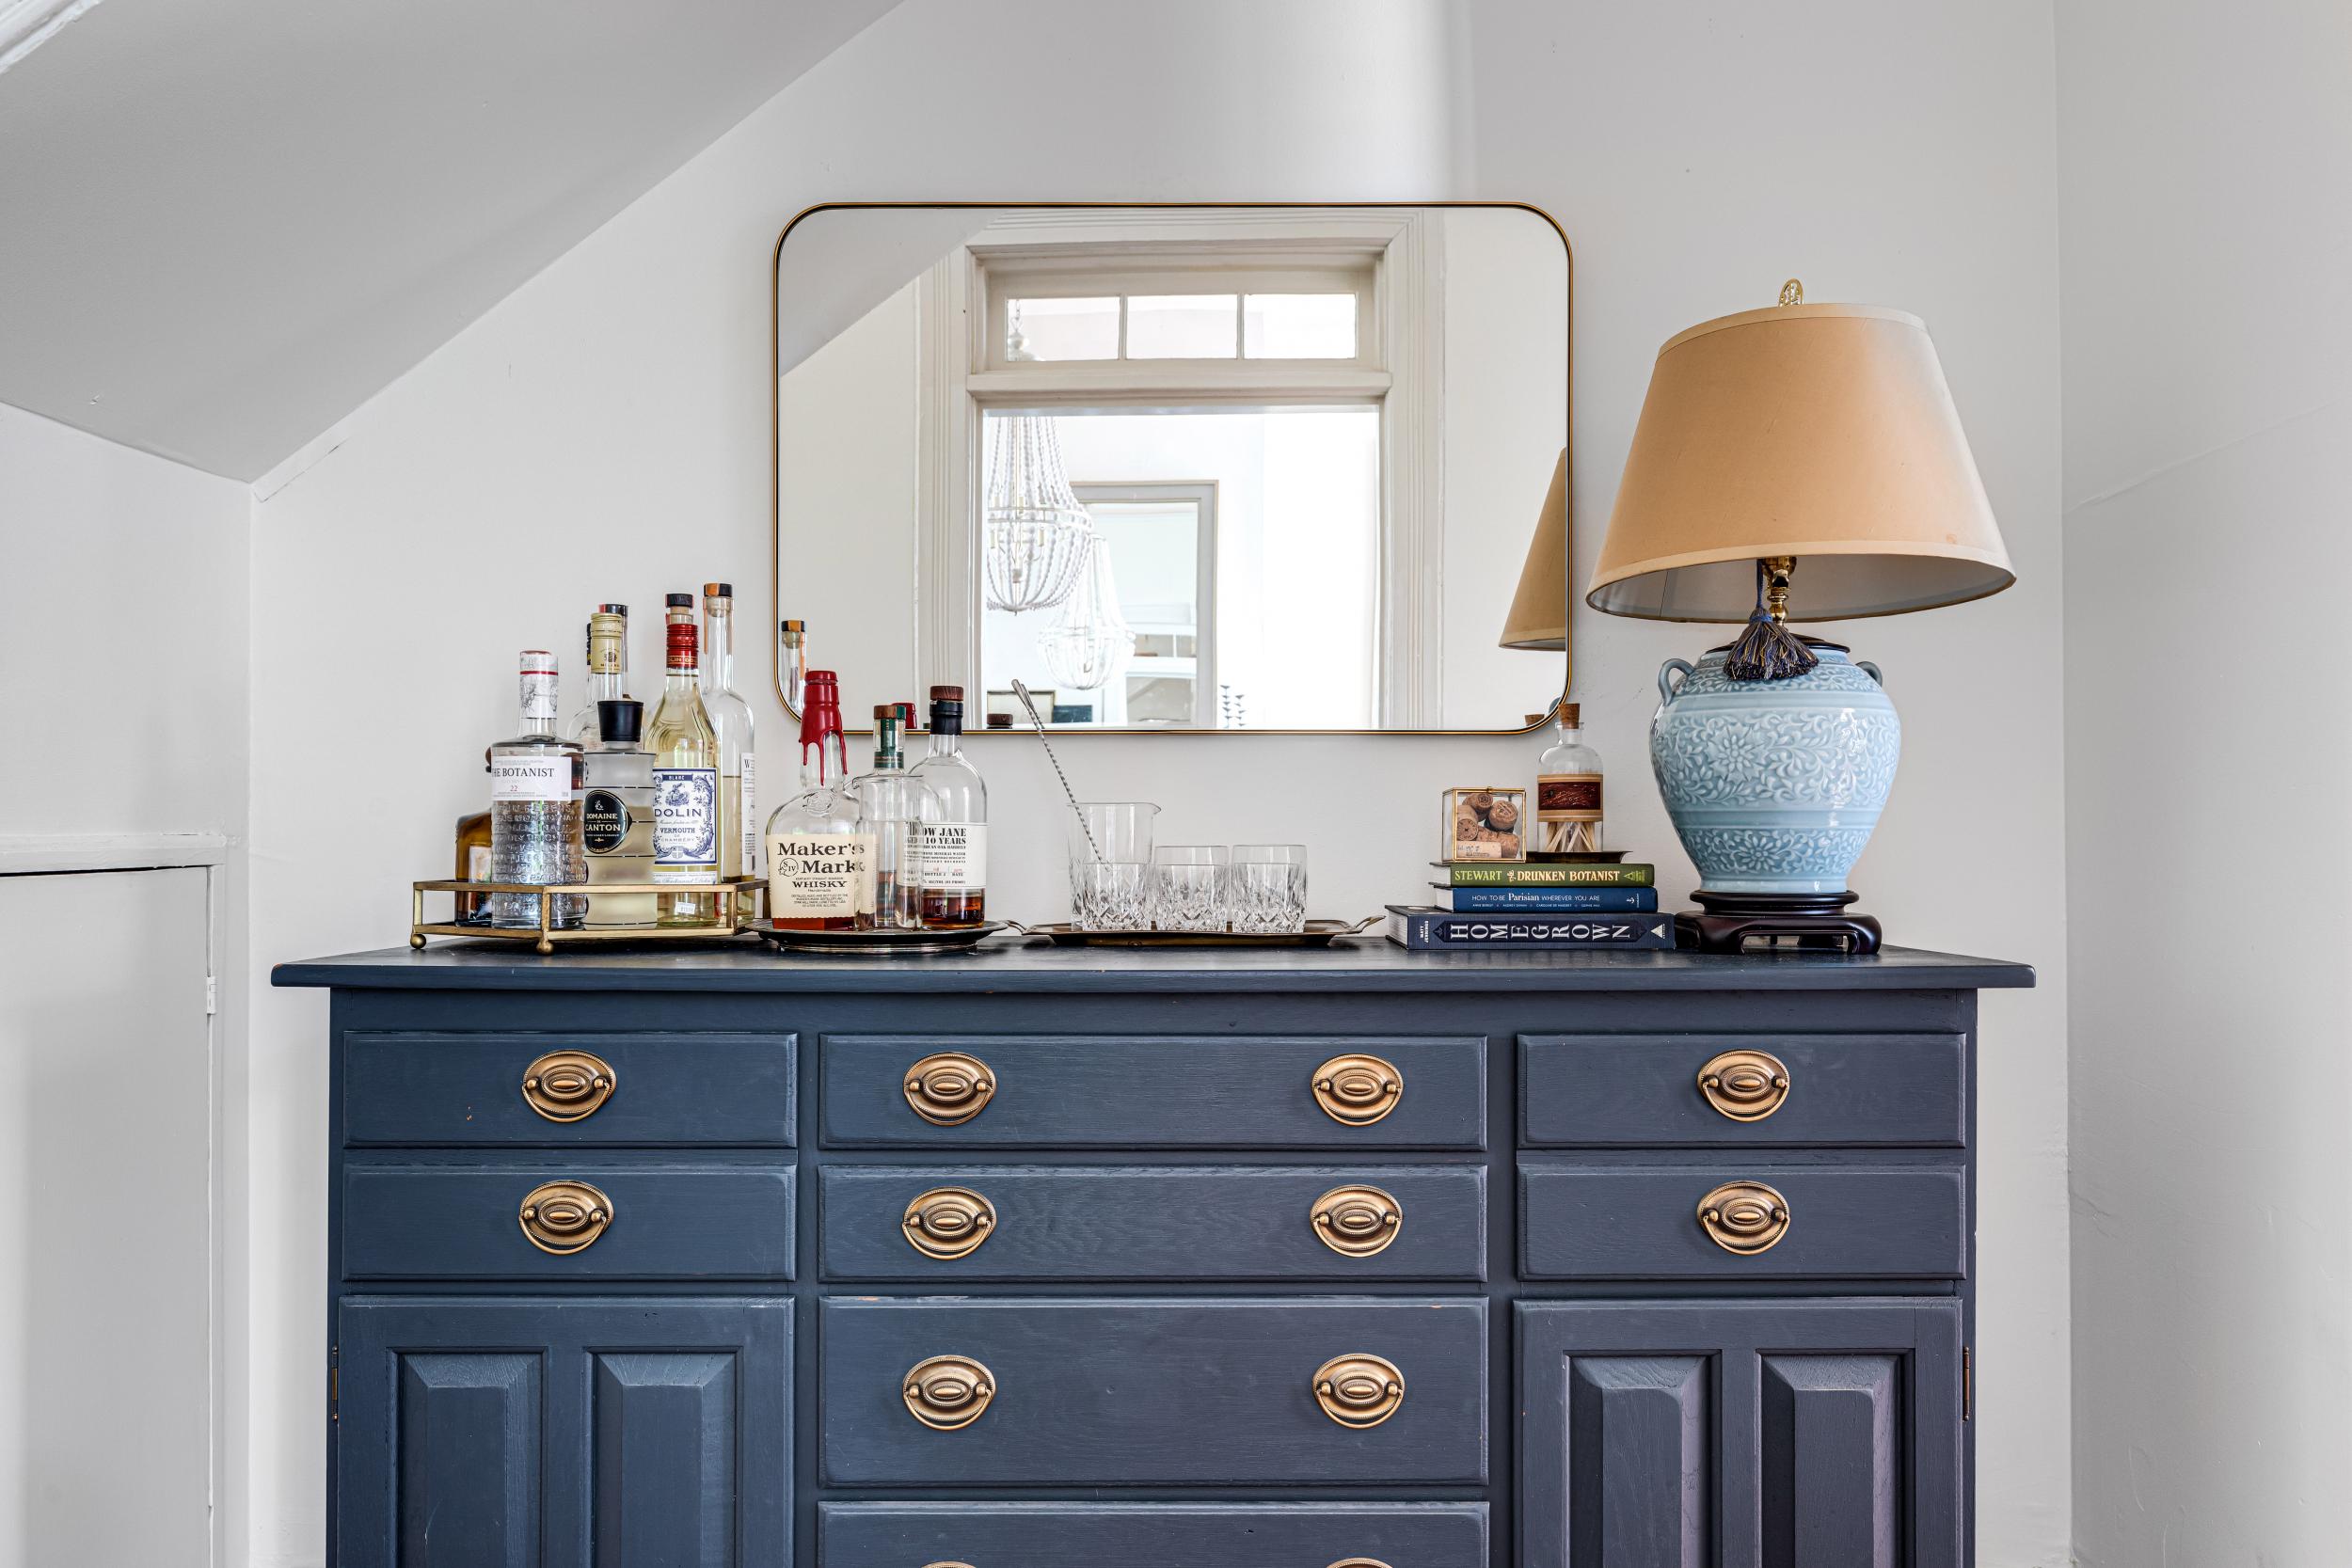 Left with a surplus of sideboards, McFadden breathed new life into this one with a fresh coat of paint